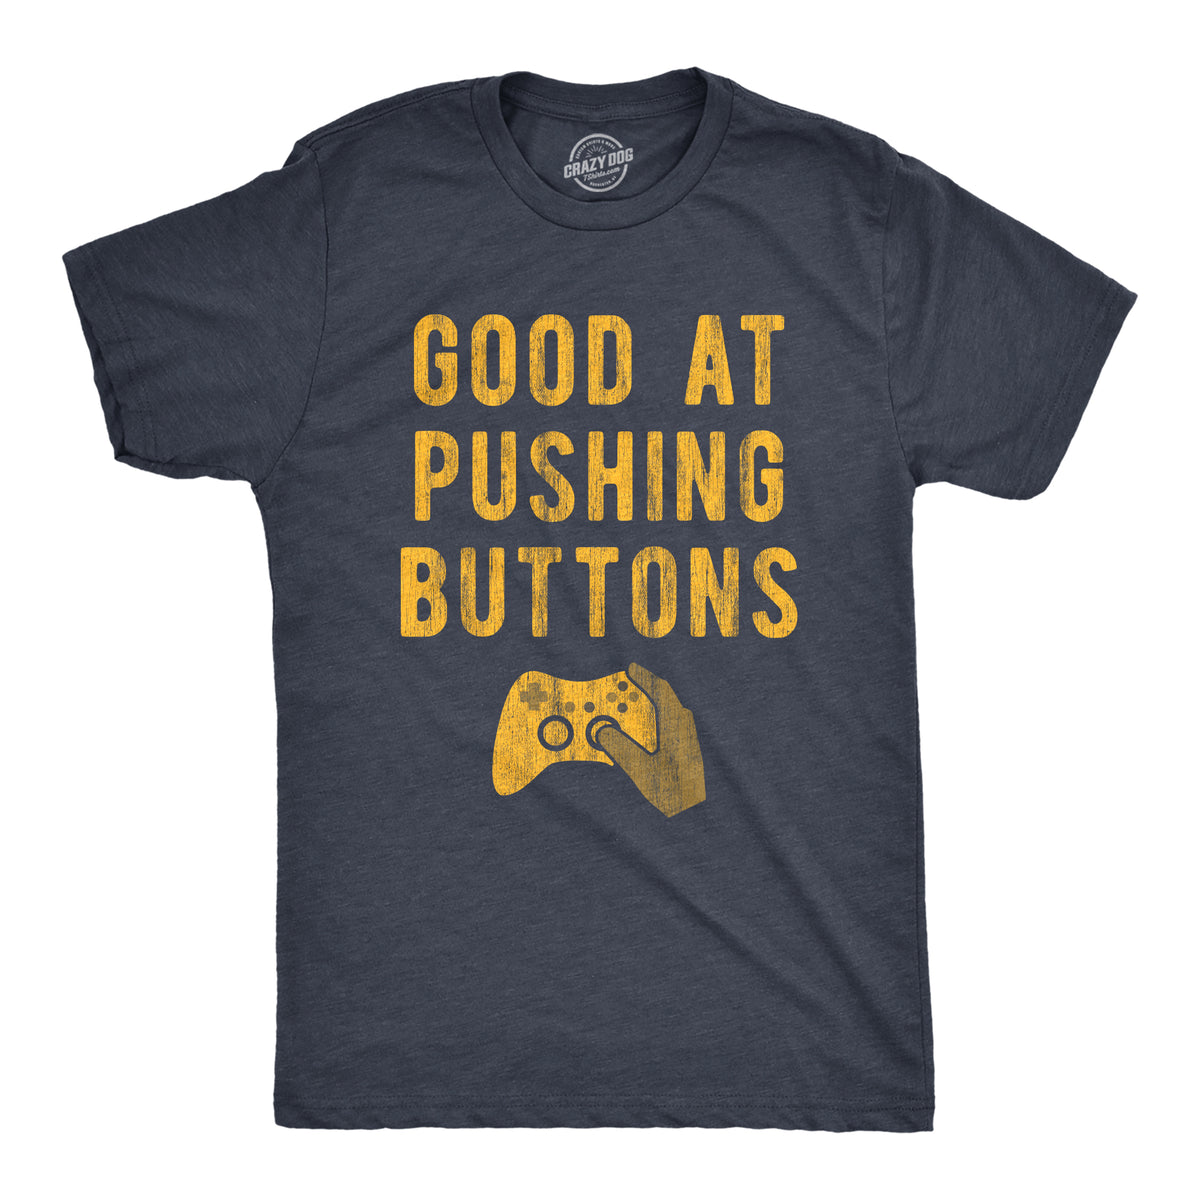 Funny Heather Navy - Pushing Buttons Good At Pushing Buttons Mens T Shirt Nerdy Video Games Nerdy Tee